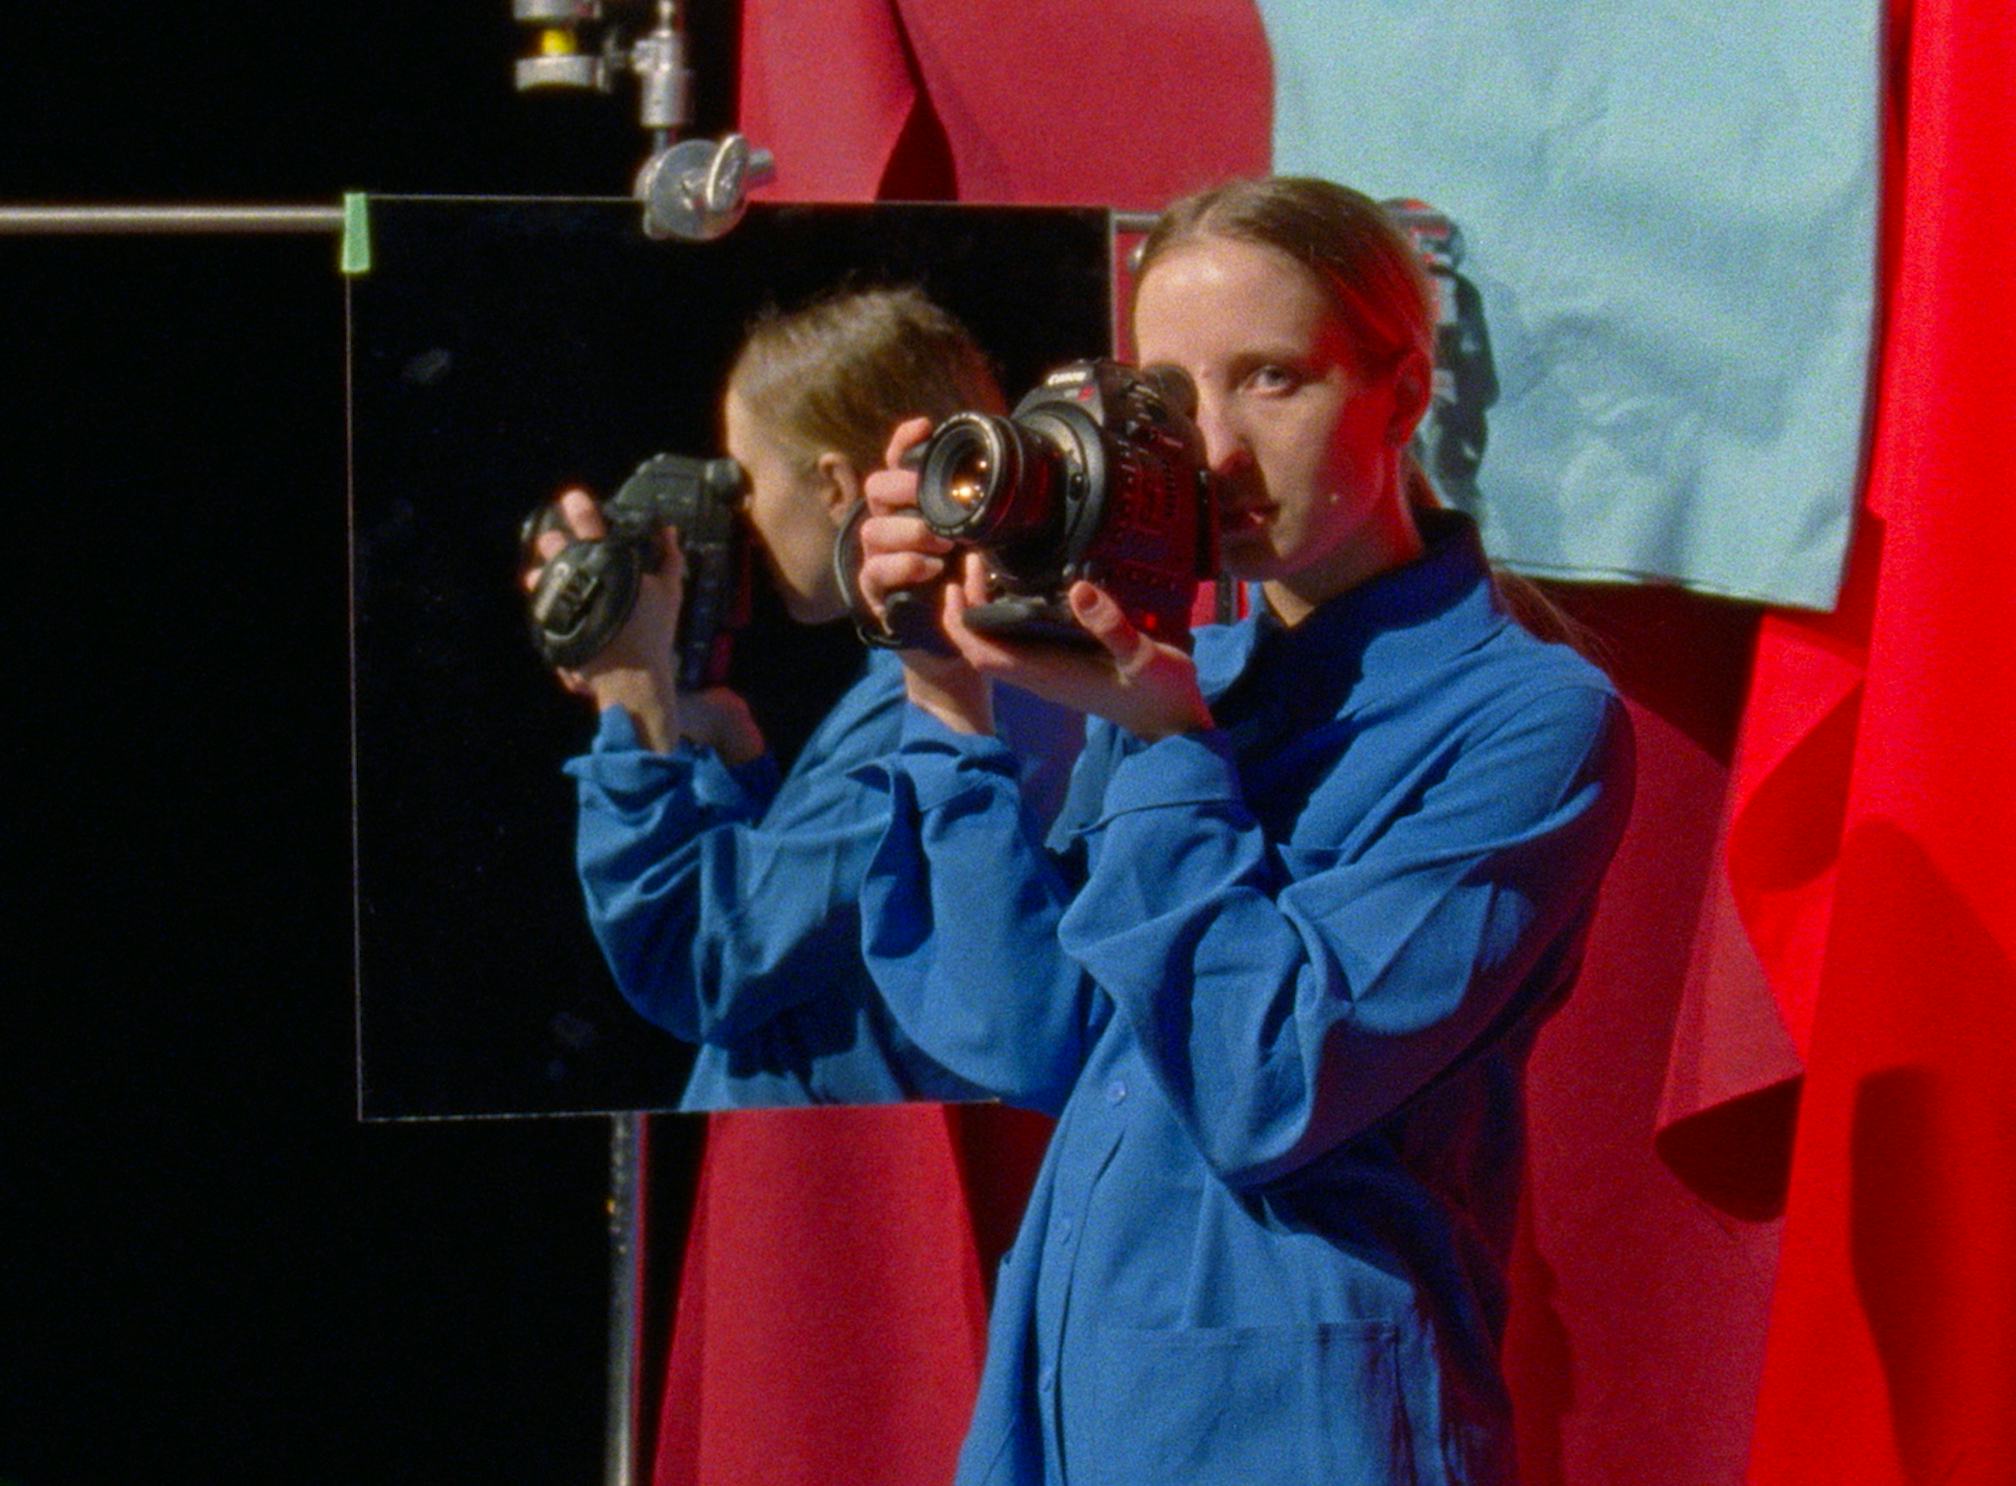 Self portrait of the artist Sara Cwynar, holding a camera in front of a mirror, in front of a red curtain.